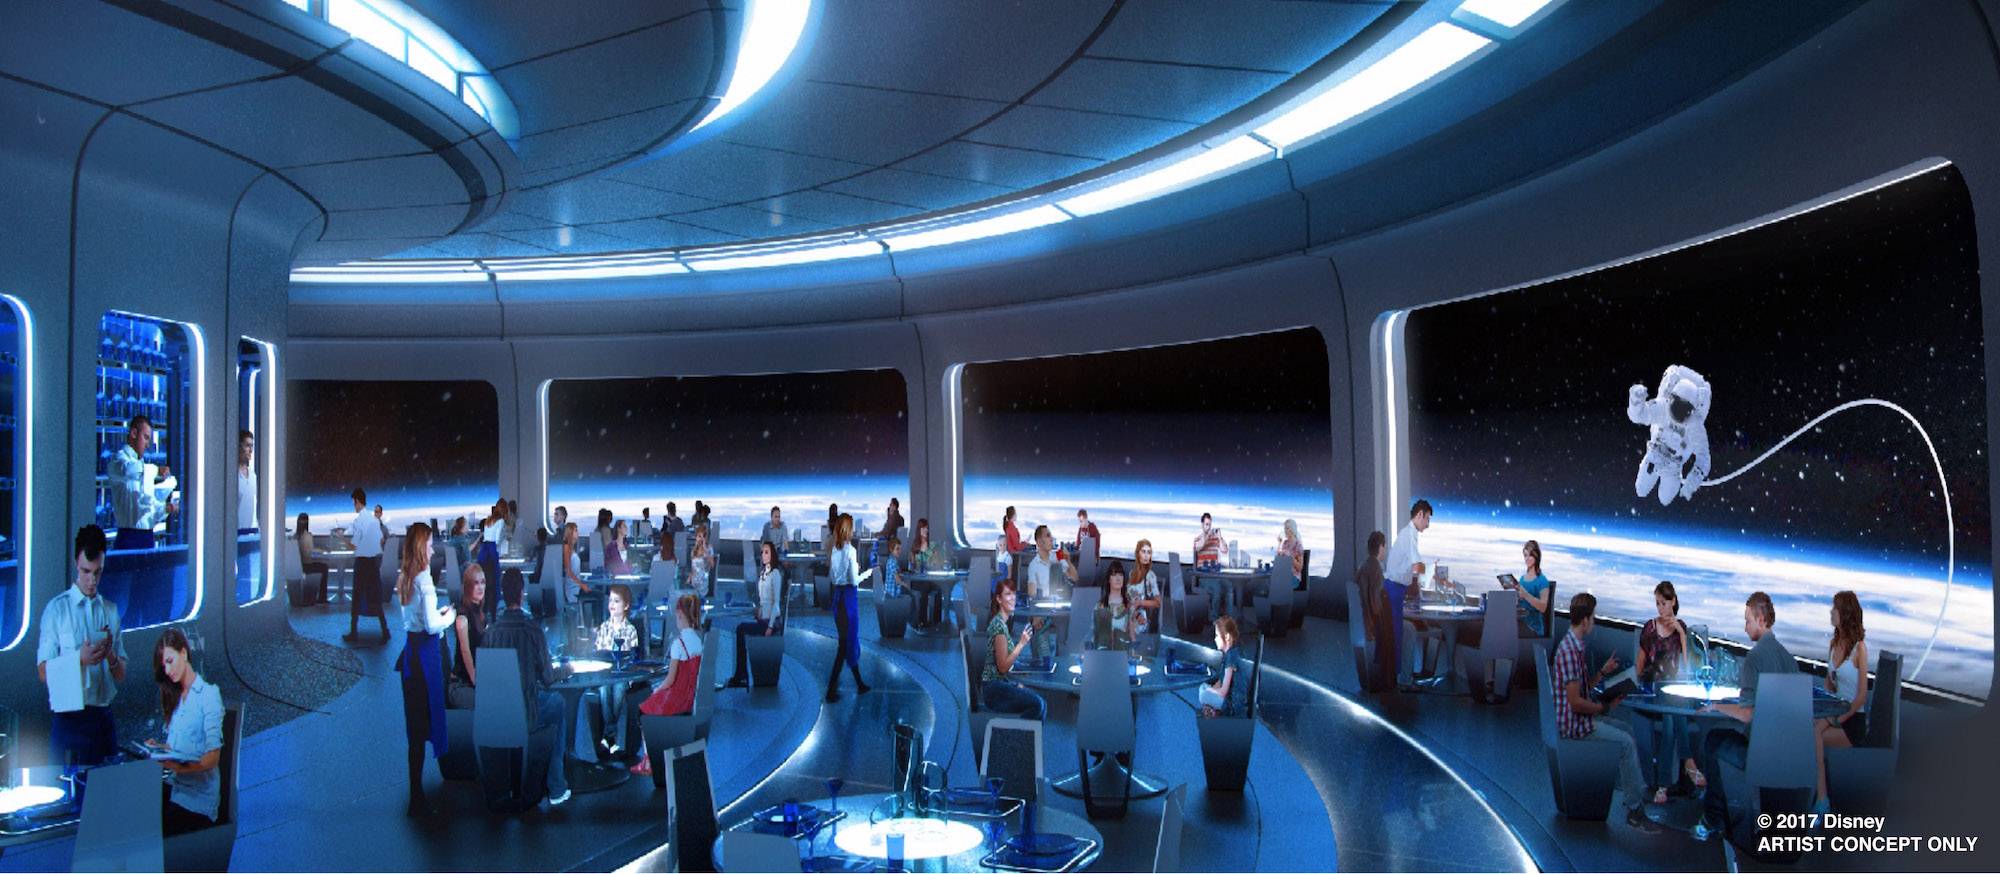 Disney confirms location of the Space-themed restaurant at Epcot